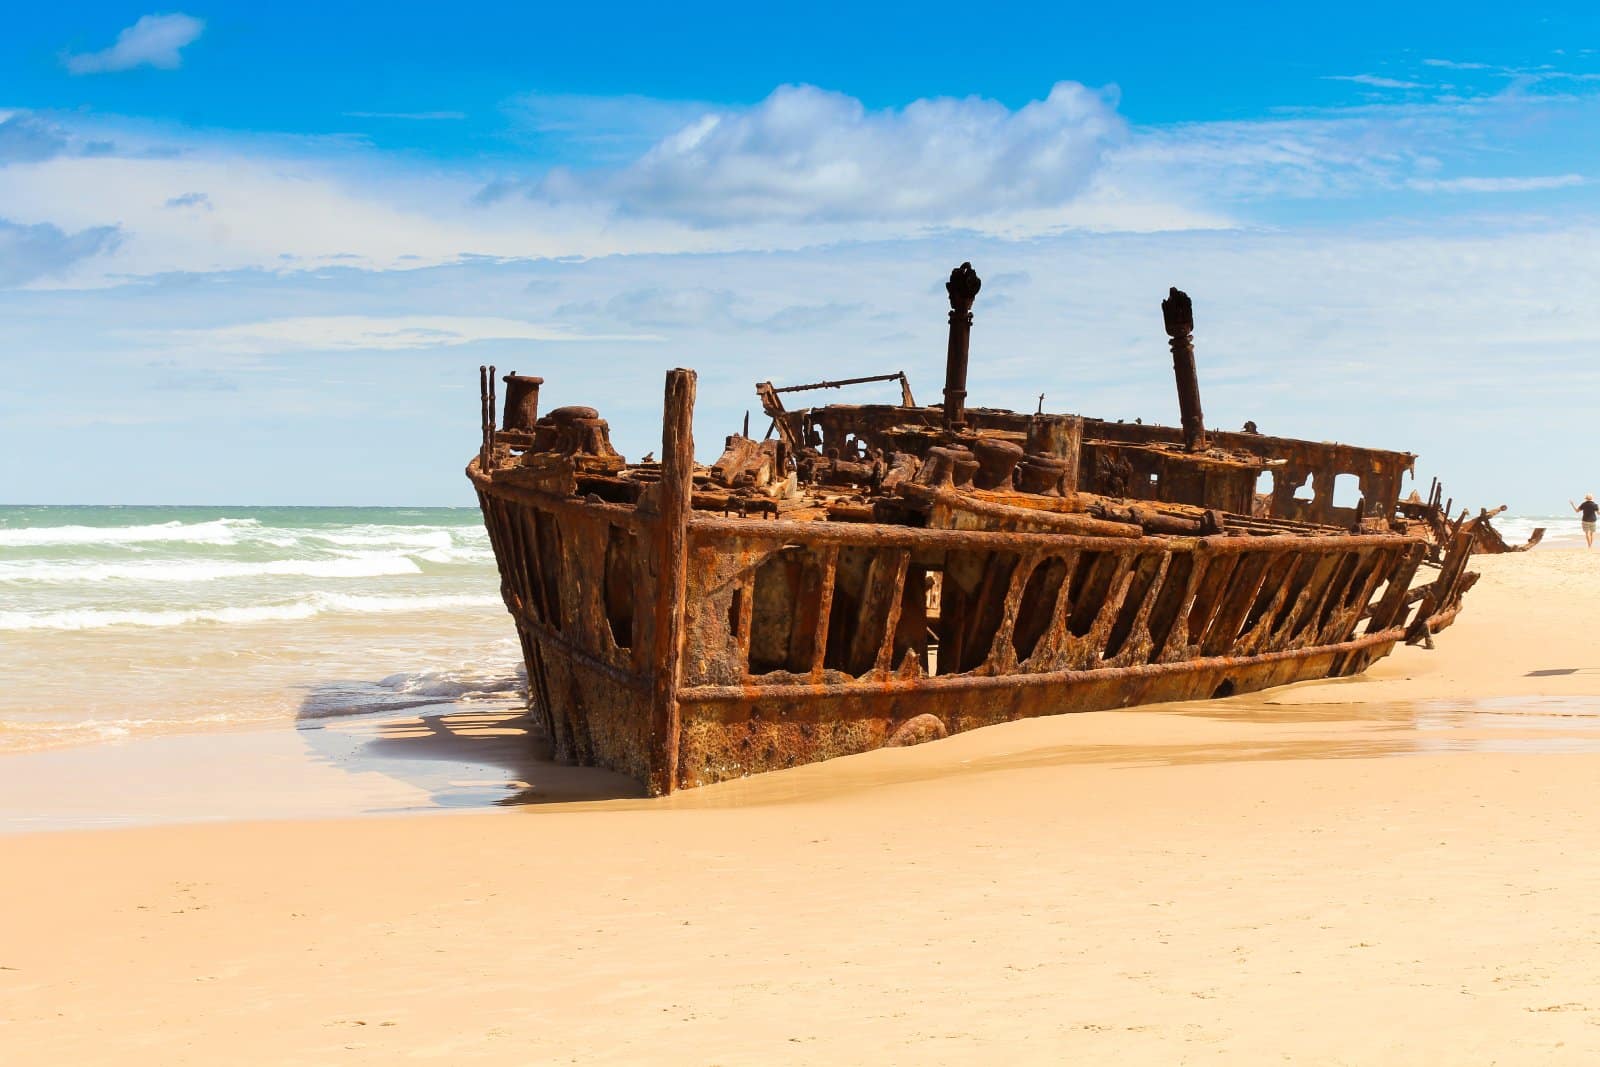 <p class="wp-caption-text">Image Credit: Shutterstock / Yannik Photography</p>  <p><span>The SS Maheno, a former ocean liner, and World War I hospital ship, met its fate on the shores of Fraser Island in 1935, stranded by a cyclone while being towed to a Japanese scrapyard. Today, its rusting hulk is a haunting yet fascinating landmark on the island’s eastern beach.</span></p> <p><span>The contrast of the corroded steel against the pristine sands and turquoise waters of the Coral Sea creates a striking scene, drawing visitors from around the globe. The ship’s history and dramatic end make the SS Maheno a must-see for anyone visiting Fraser Island.</span></p> <p><b>Insider’s Tip:</b><span> Visit at low tide when more of the wreck is exposed, offering a better view and photographic opportunities. Early morning or late afternoon light casts dramatic shadows, enhancing the wreck’s eerie beauty.</span></p> <p><b>When to Travel:</b><span> The best time to visit Fraser Island is from June to October, avoiding the peak of the Australian summer while enjoying mild weather.</span></p> <p><b>How to Get There:</b><span> Fly into Hervey Bay or Sunshine Coast airports, then take a ferry or a barge to Fraser Island. The SS Maheno is accessible by 4WD along Seventy-Five Mile Beach.</span></p>